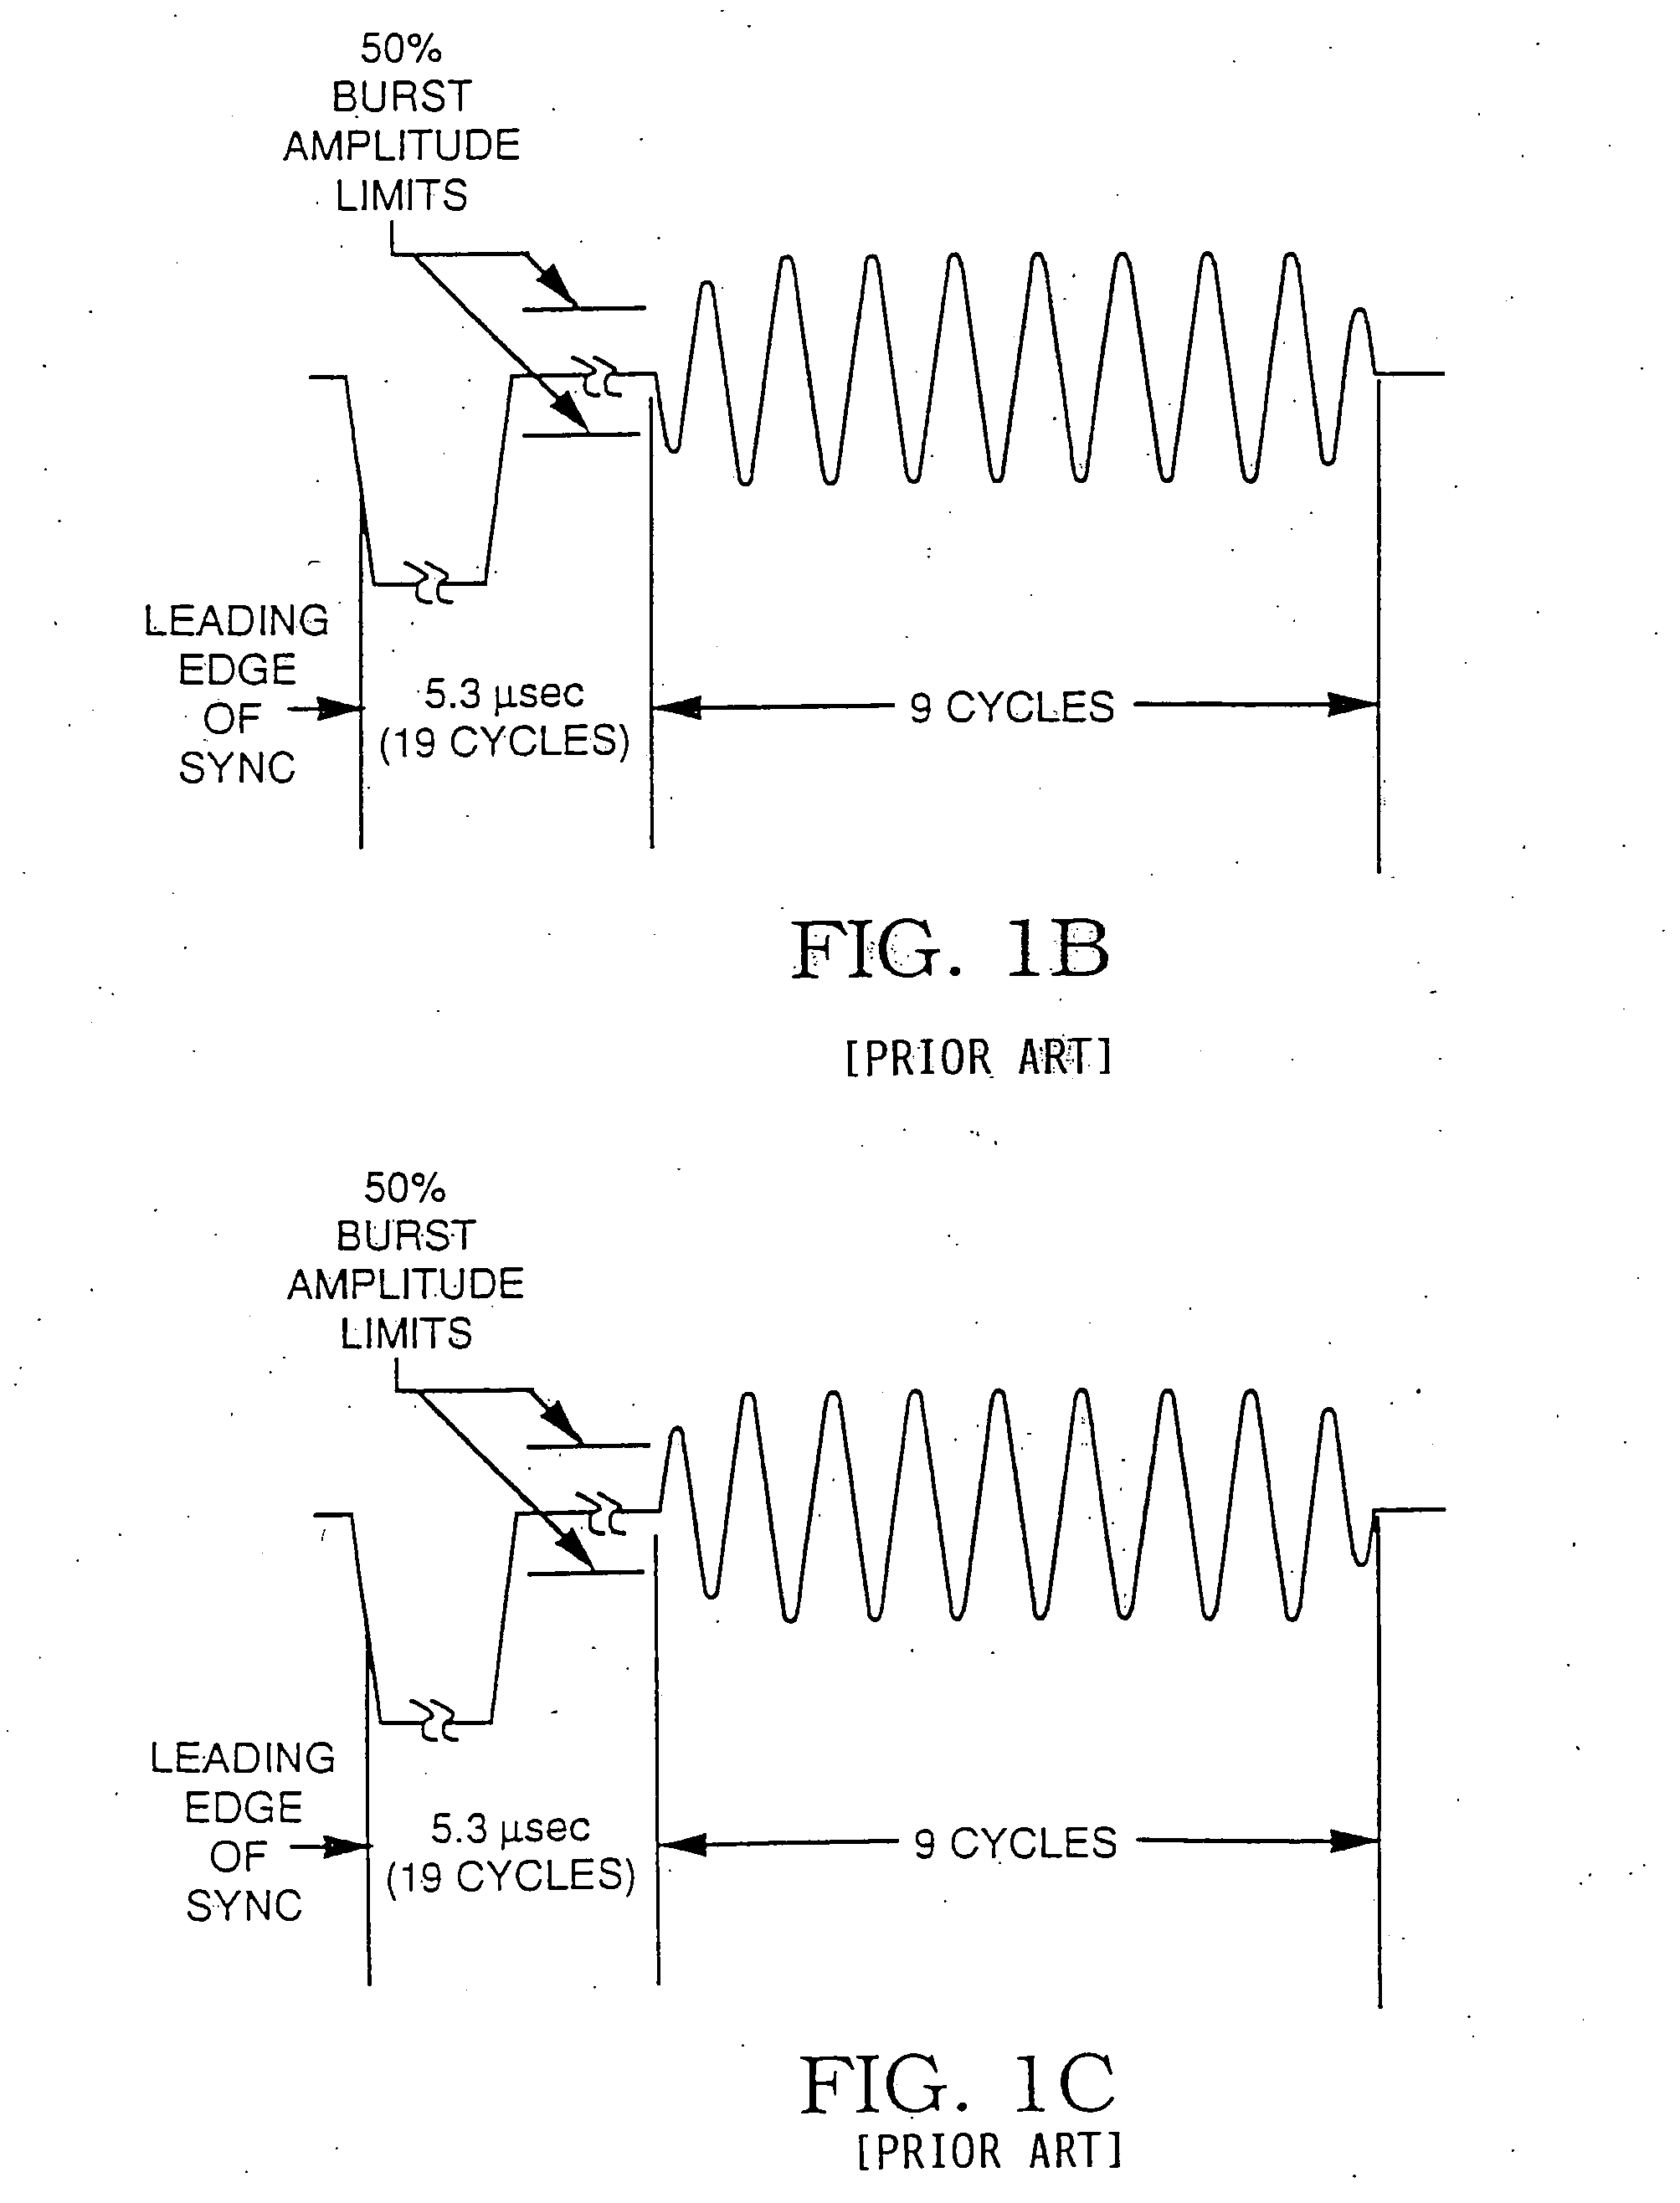 Method and apparatus for defeating effects of color burst modifications to a video signal